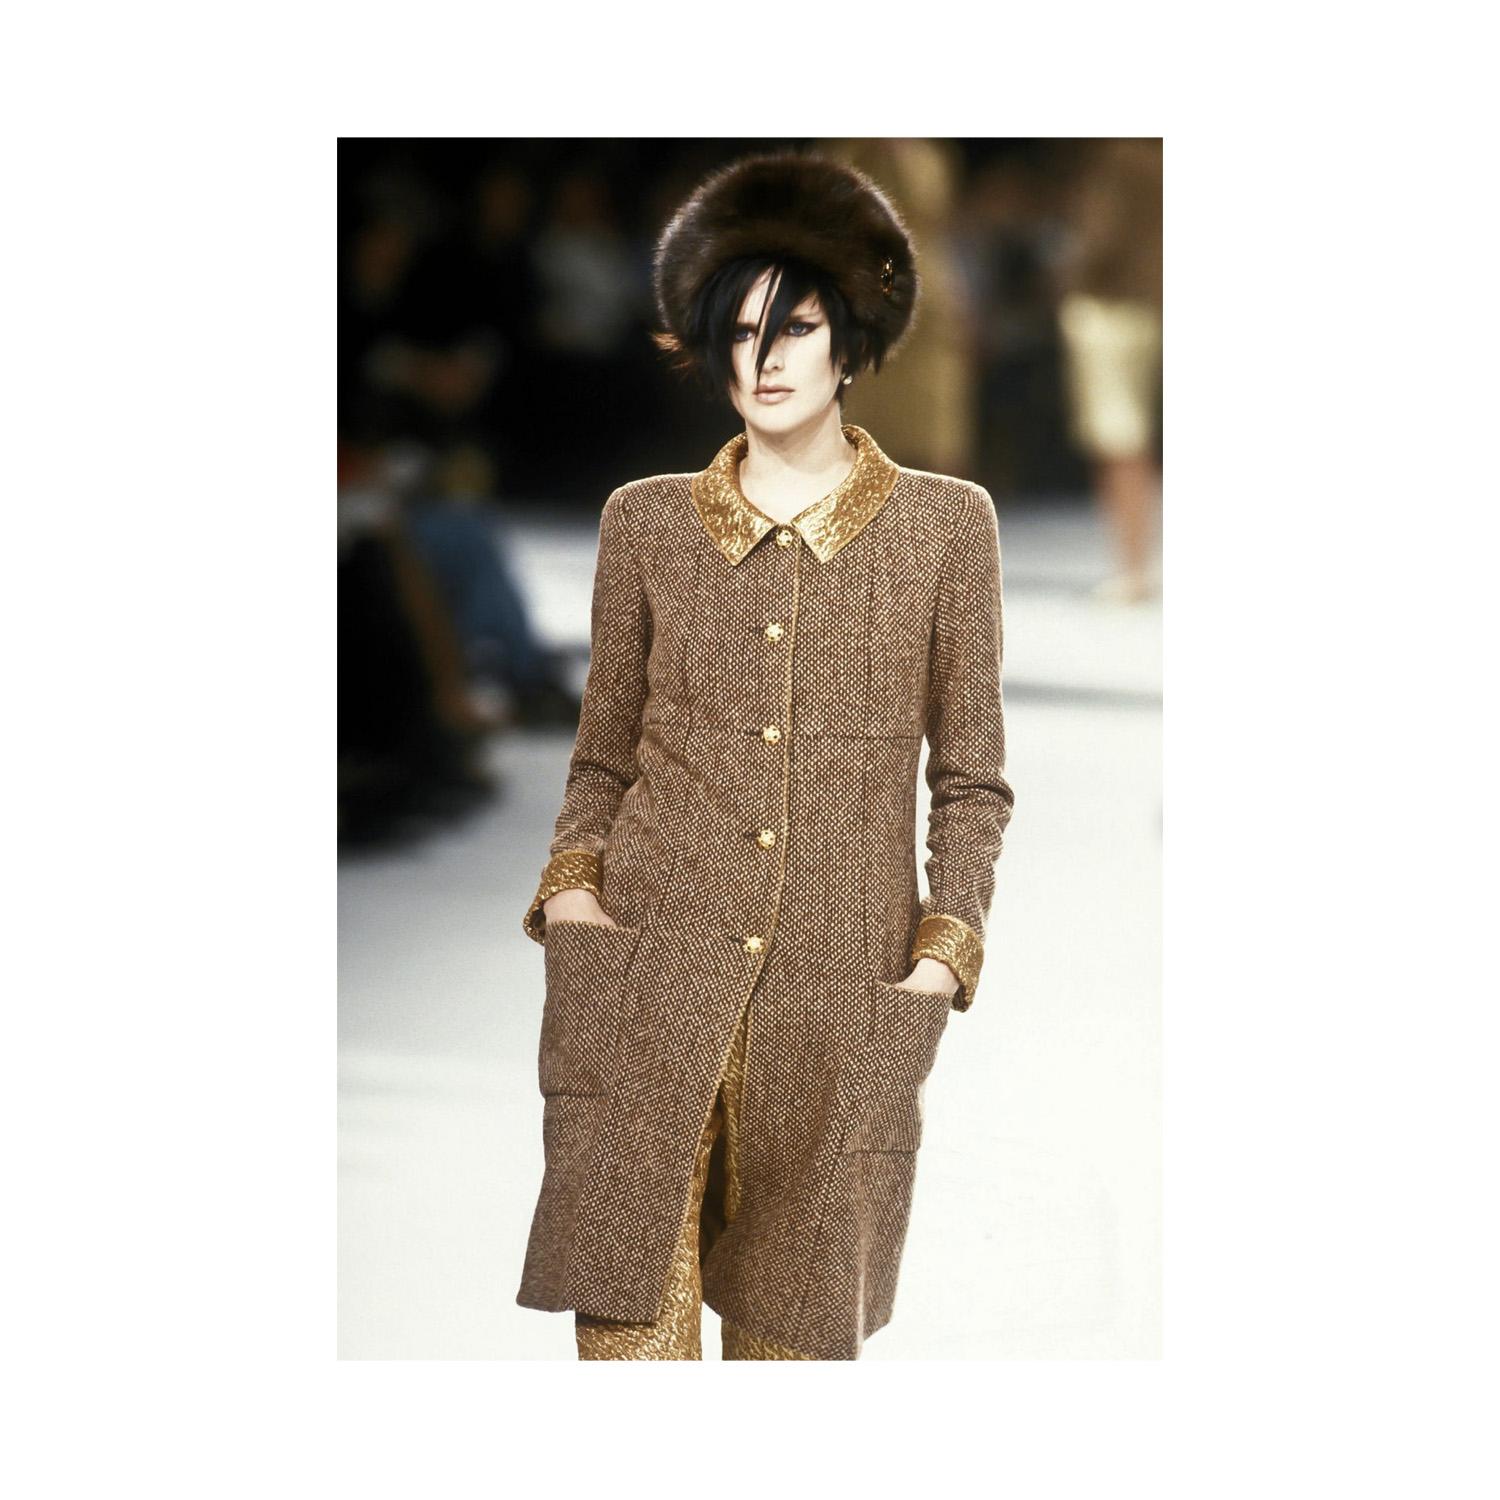 Chanel Pantomin Lamee gold set including: wool brown coat, long sleeve, jewel buttons fastening, frontal pocket gold lamé collar and cuffs and gold lamé pants, sigarette style, embellished with jewel buttons. 

NFT option available.

Total length -